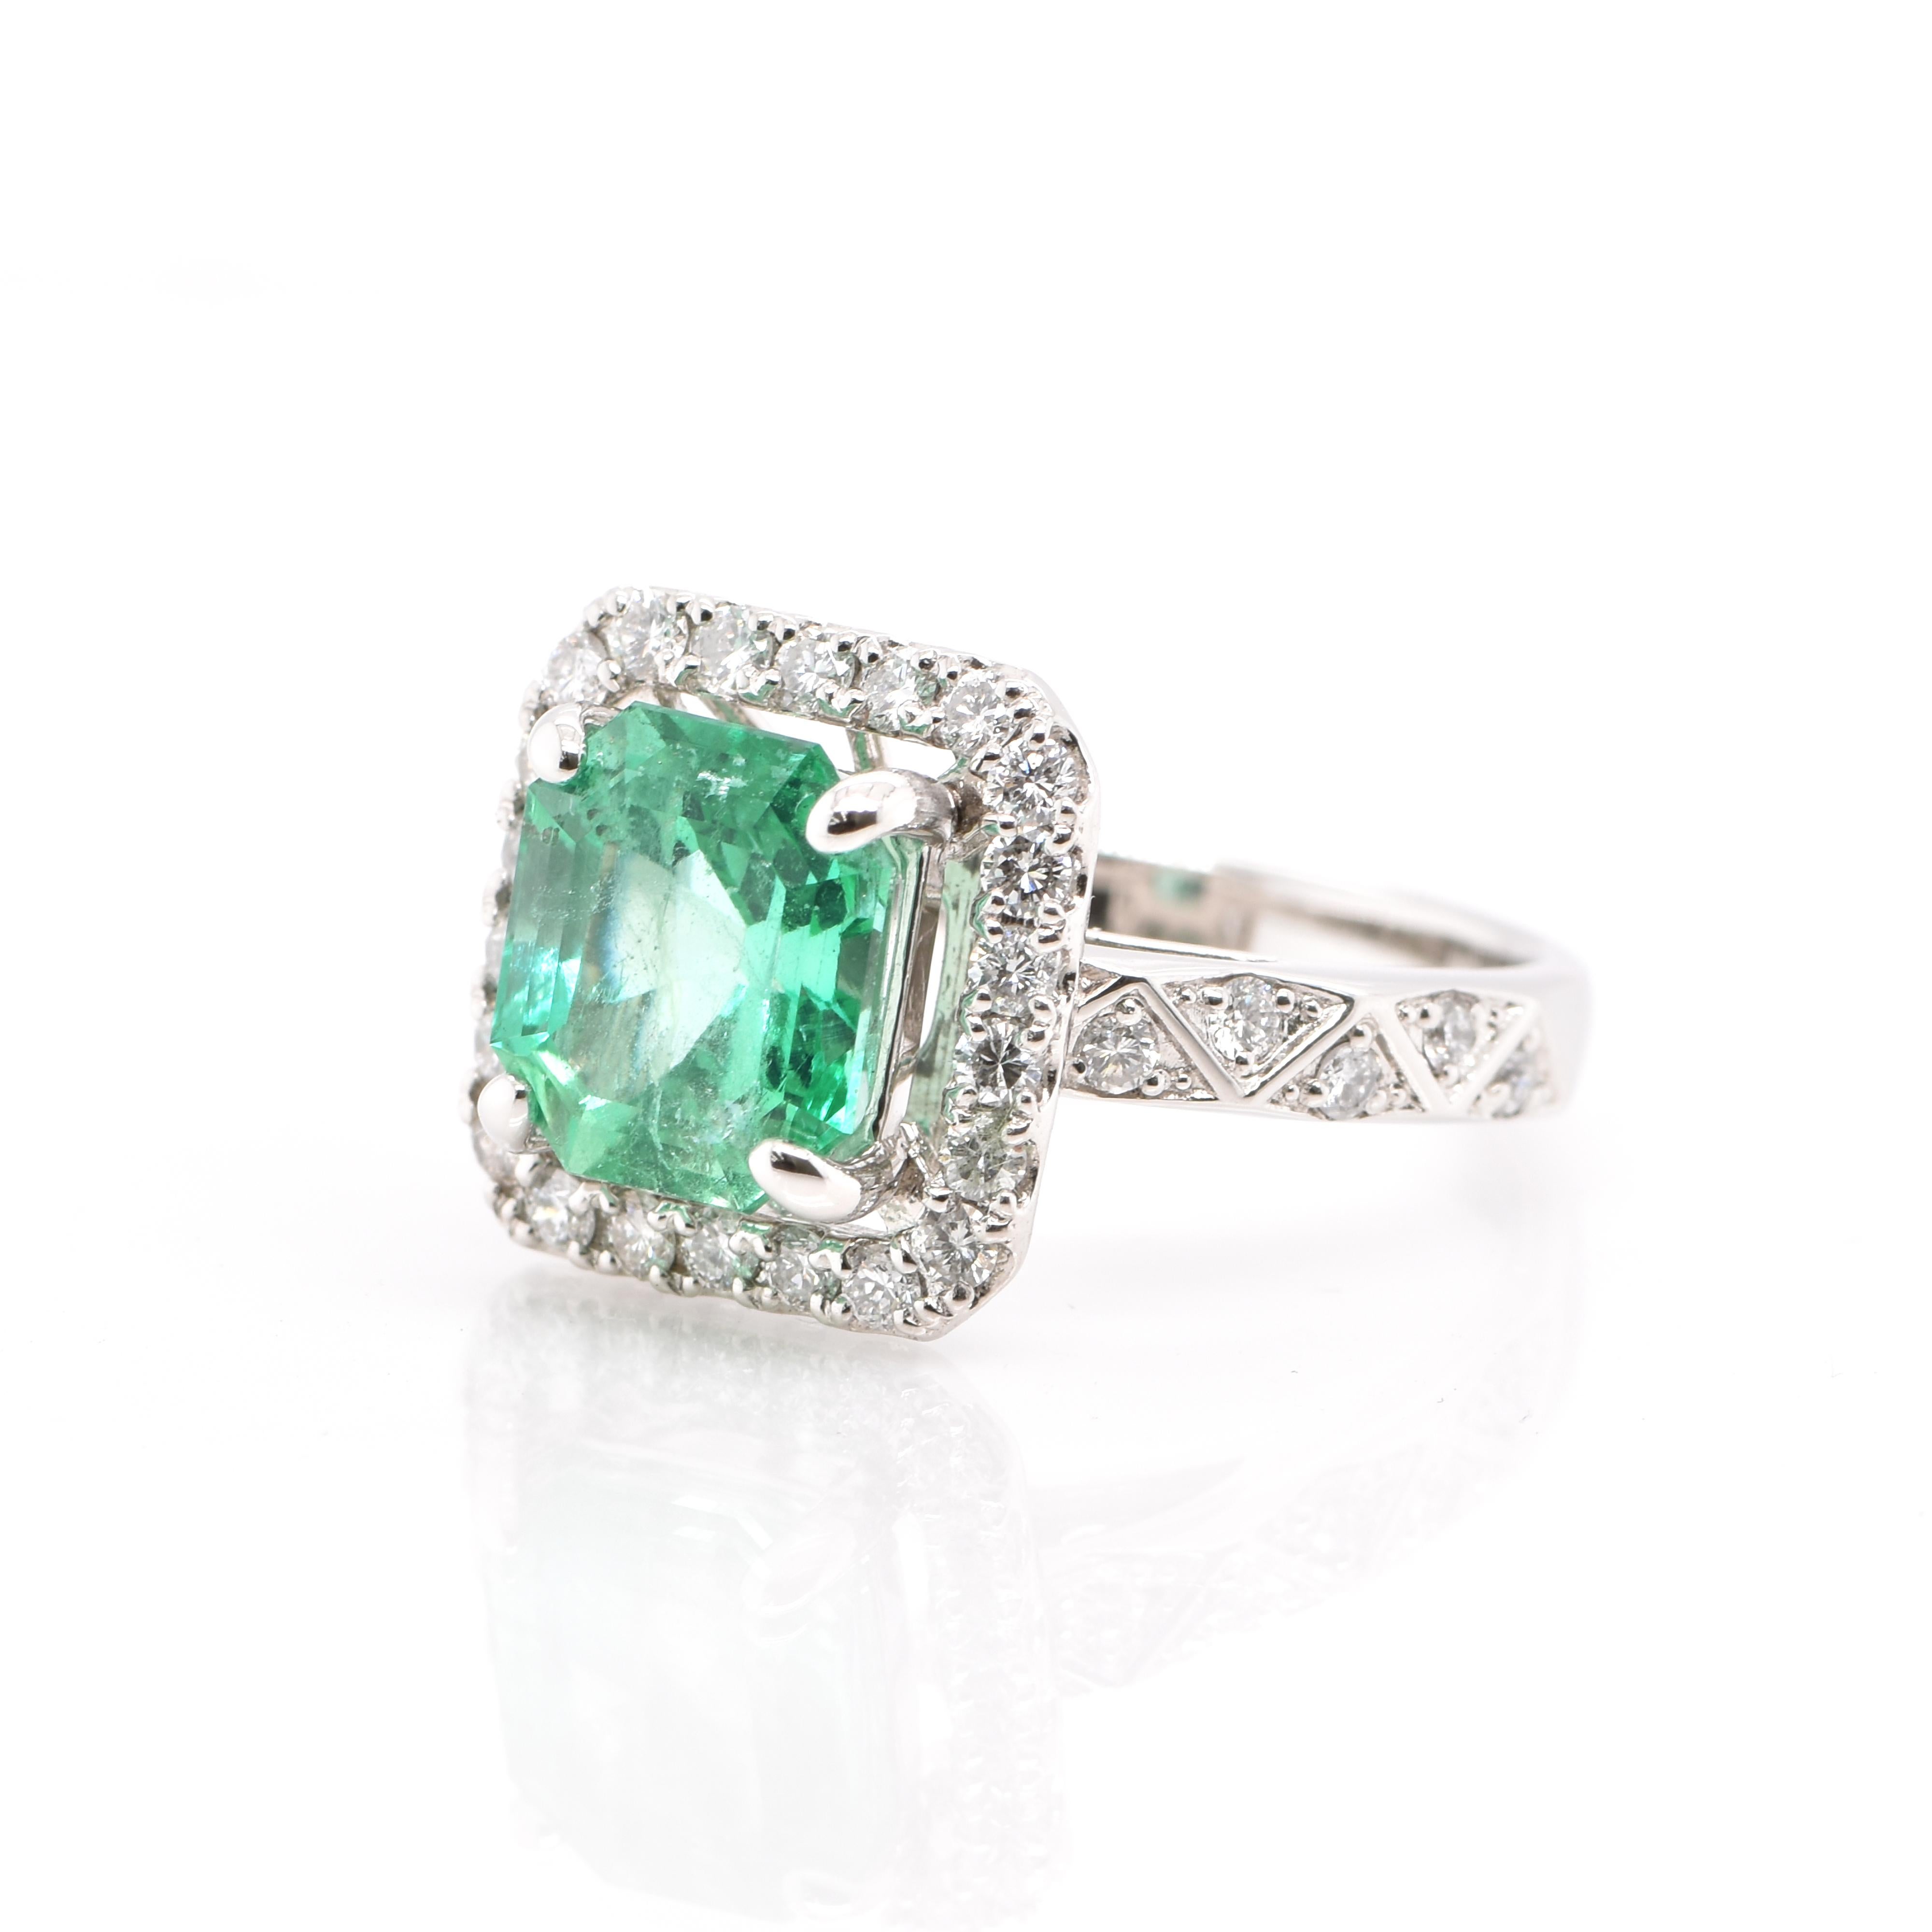 A stunning Cocktail Ring featuring a 2.48 Carat, Natural, Colombian Emerald and 0.52 Carats of Diamond Accents set in Platinum. People have admired emerald’s green for thousands of years. Emeralds have always been associated with the lushest